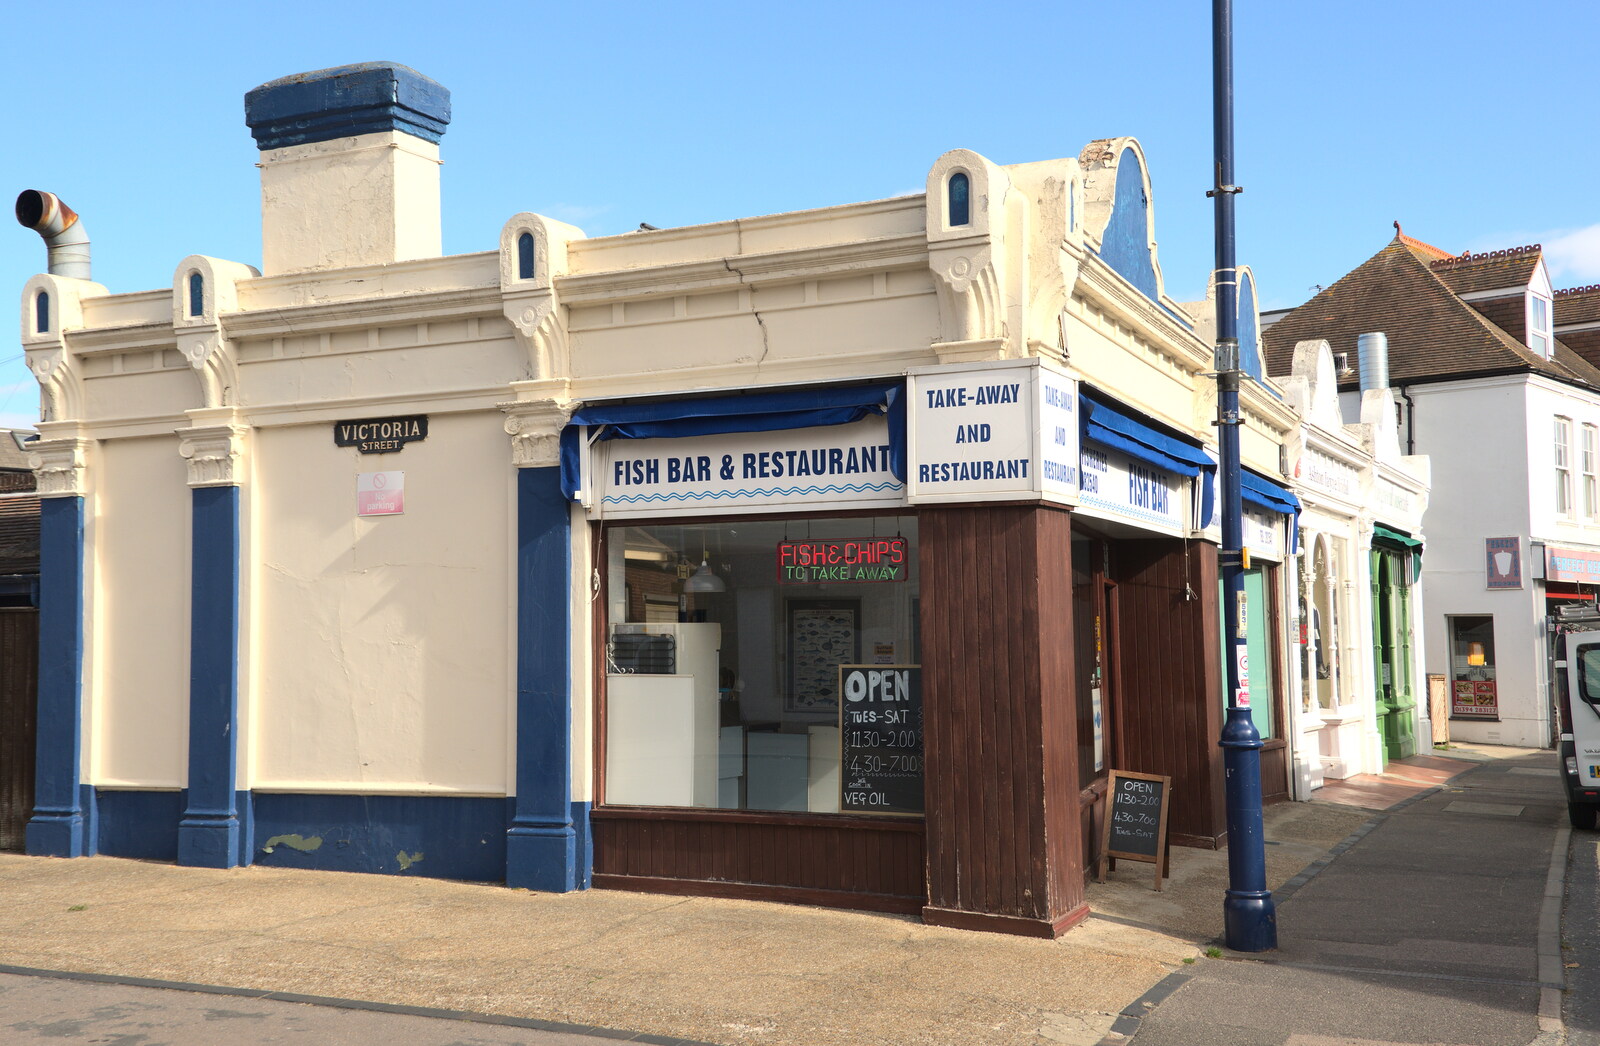 A Victorian chip shop on Victoria Street from A Postcard from Felixstowe, Suffolk - 5th October 2022